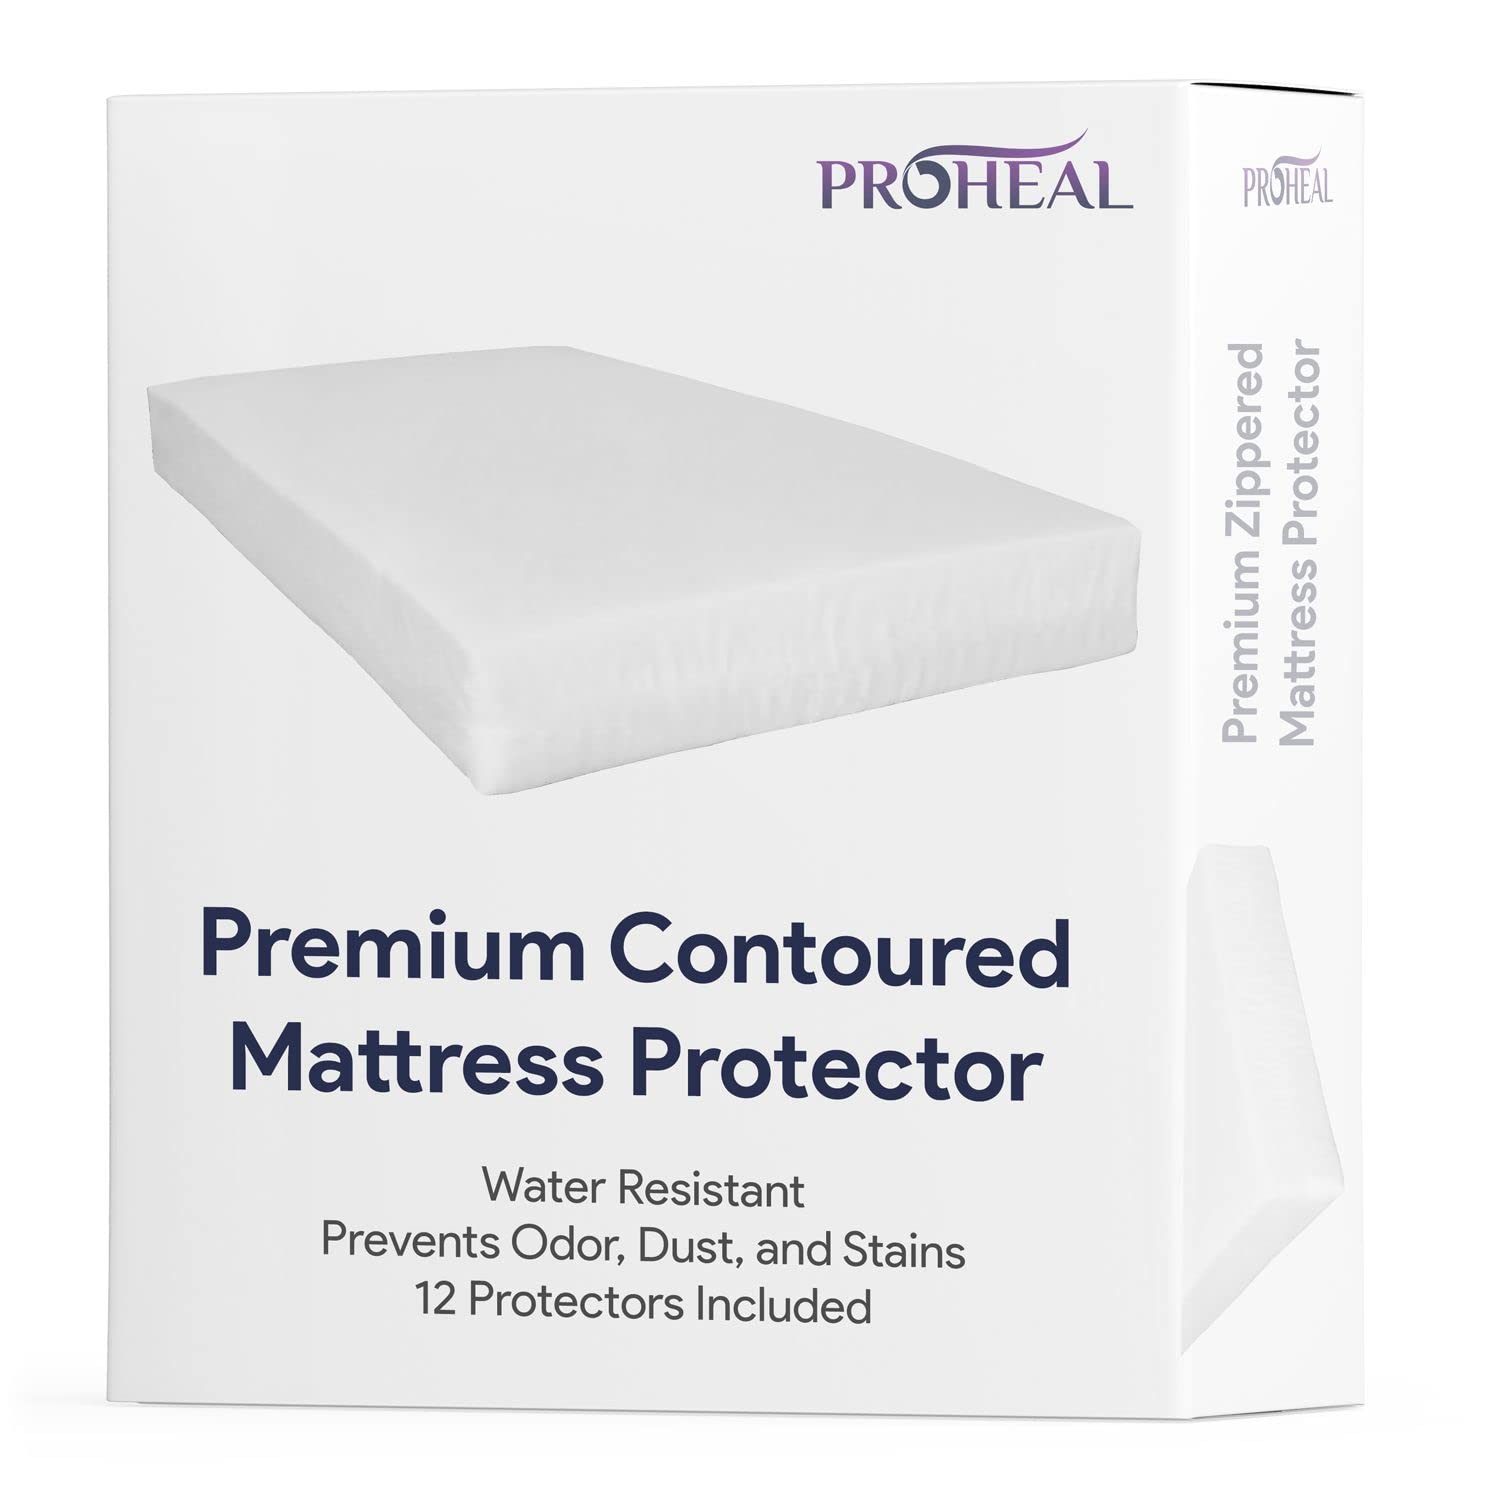 Hospital Bed Mattress Protector - 36" x 80" x 6" - Water Resistant Cover - Protect Bed from Odor, Dust, and Stains - Mattress Cover - 12 Pieces  - Like New